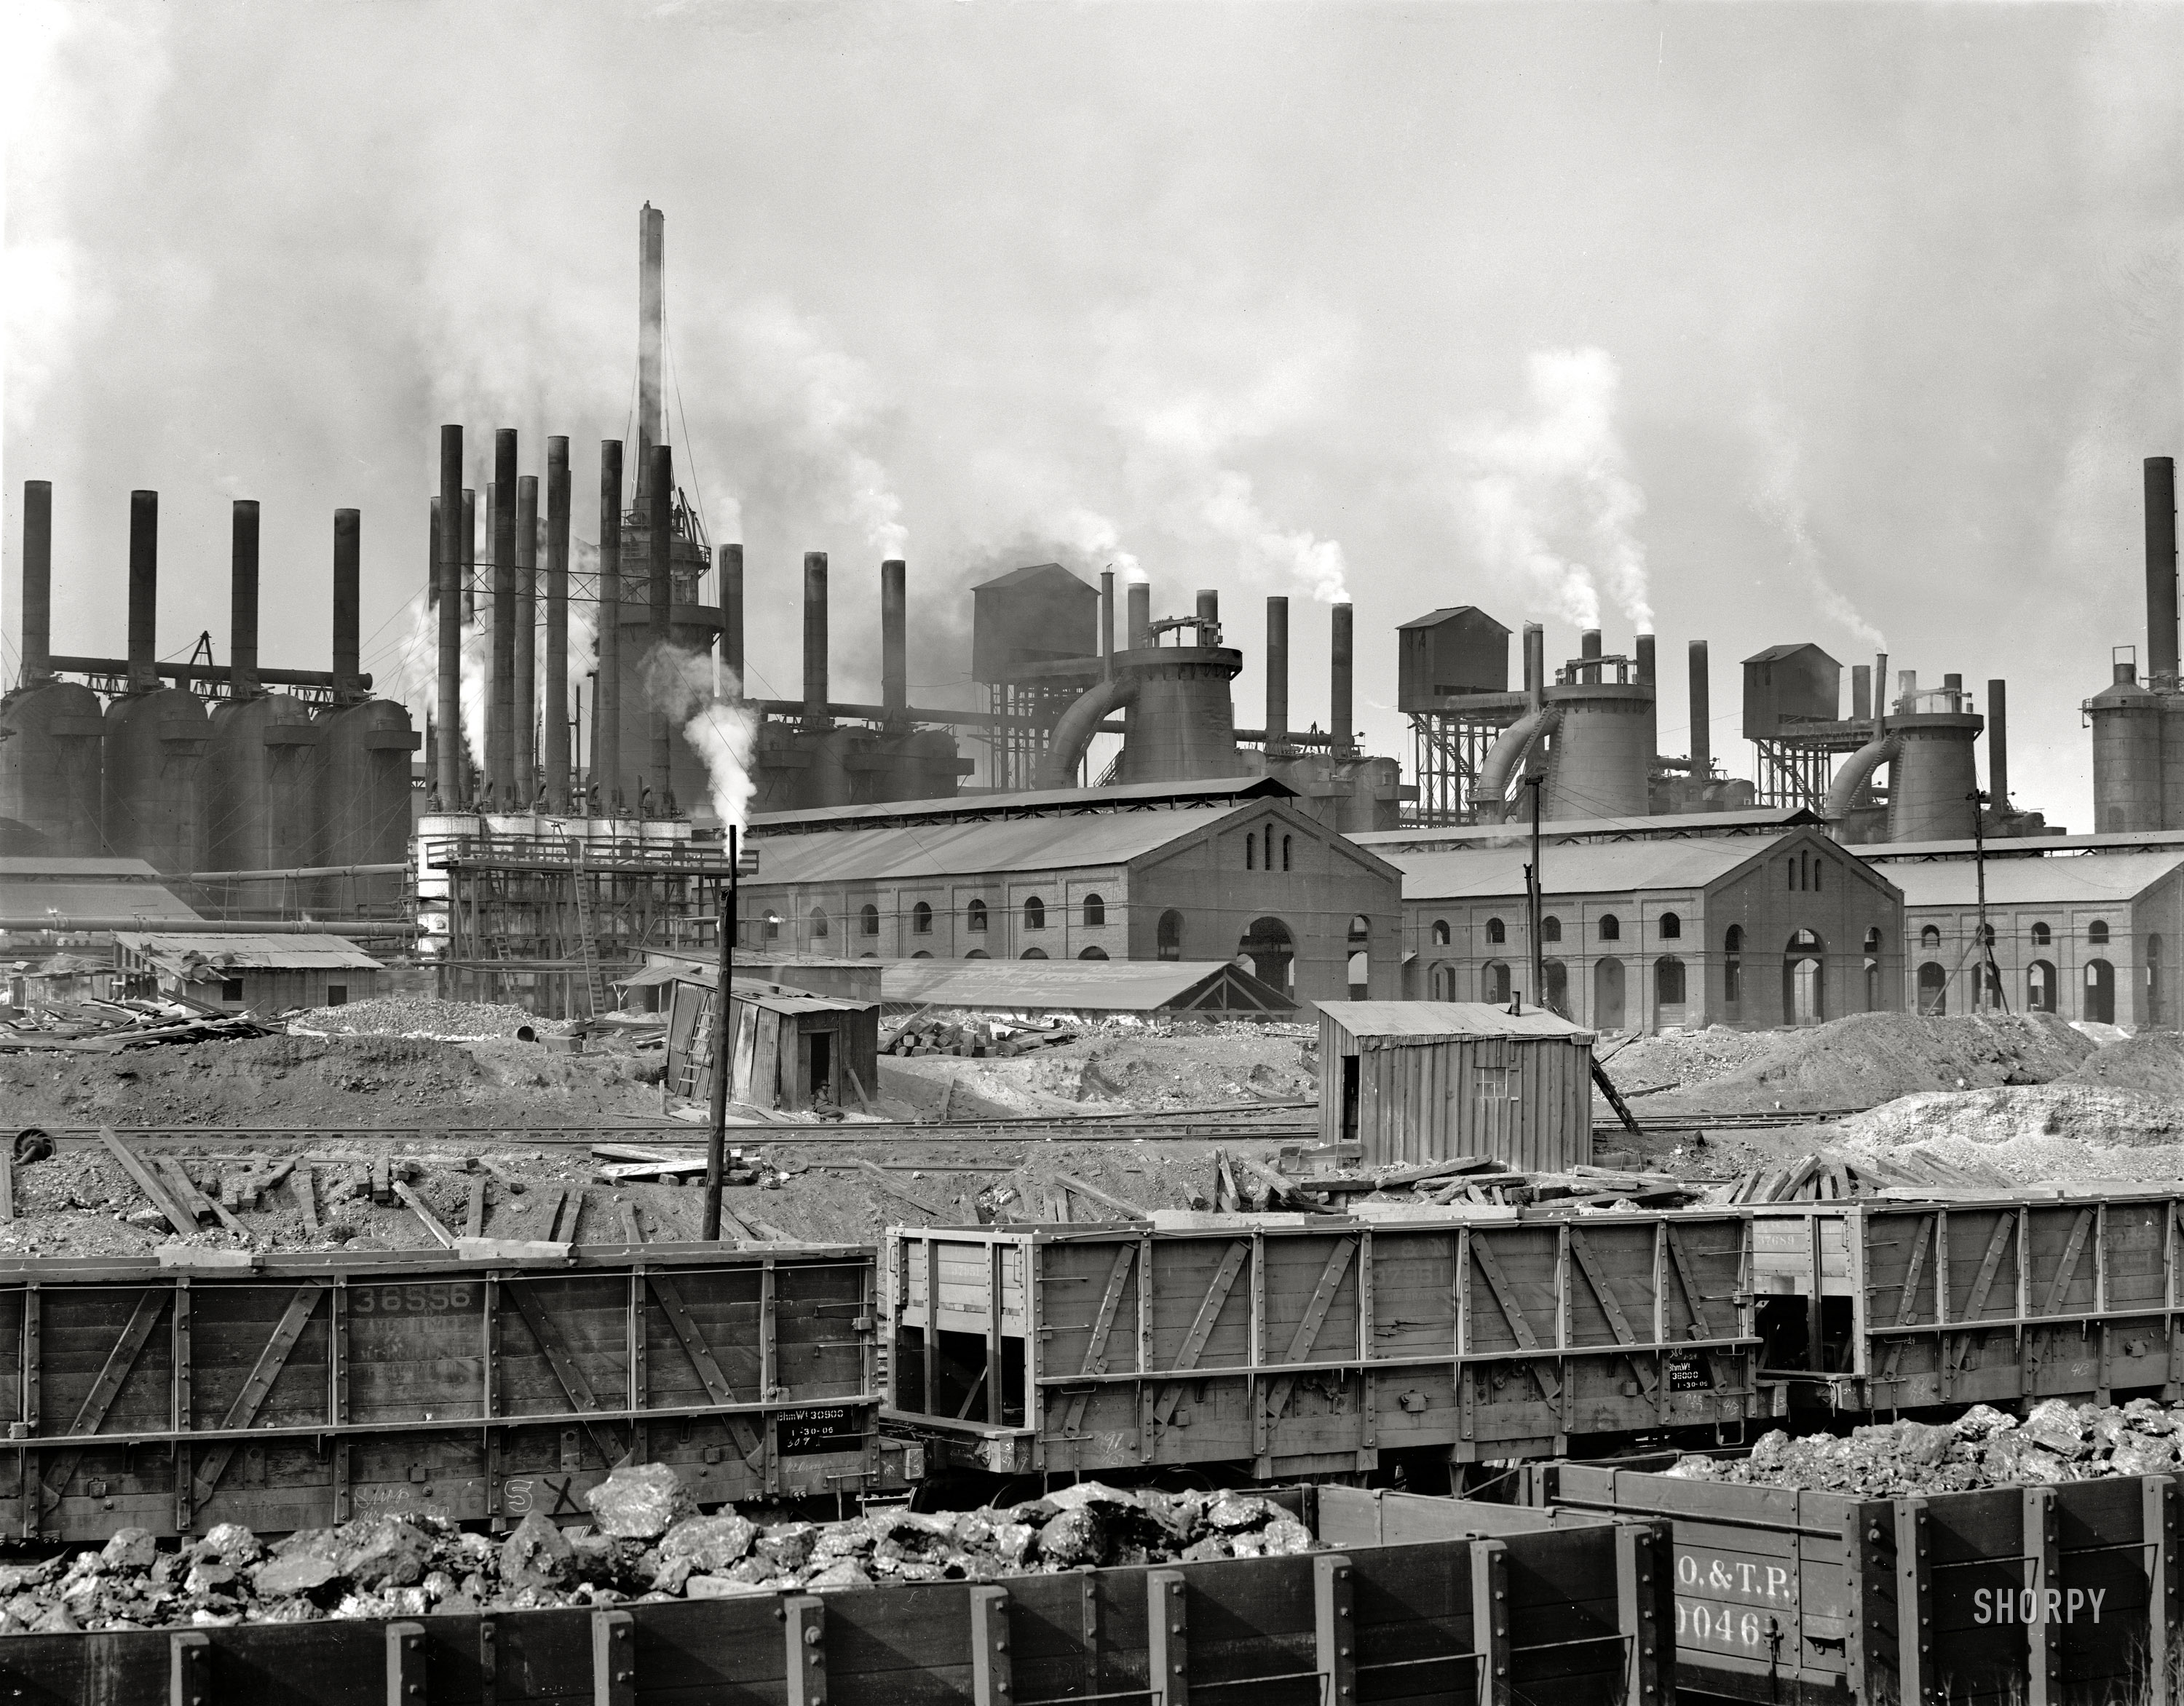 Ensley, Alabama, circa 1906. "Tennessee Coal, Iron and Railroad Co. furnaces." 8x10 inch dry plate glass negative, Detroit Publishing Company. View full size.